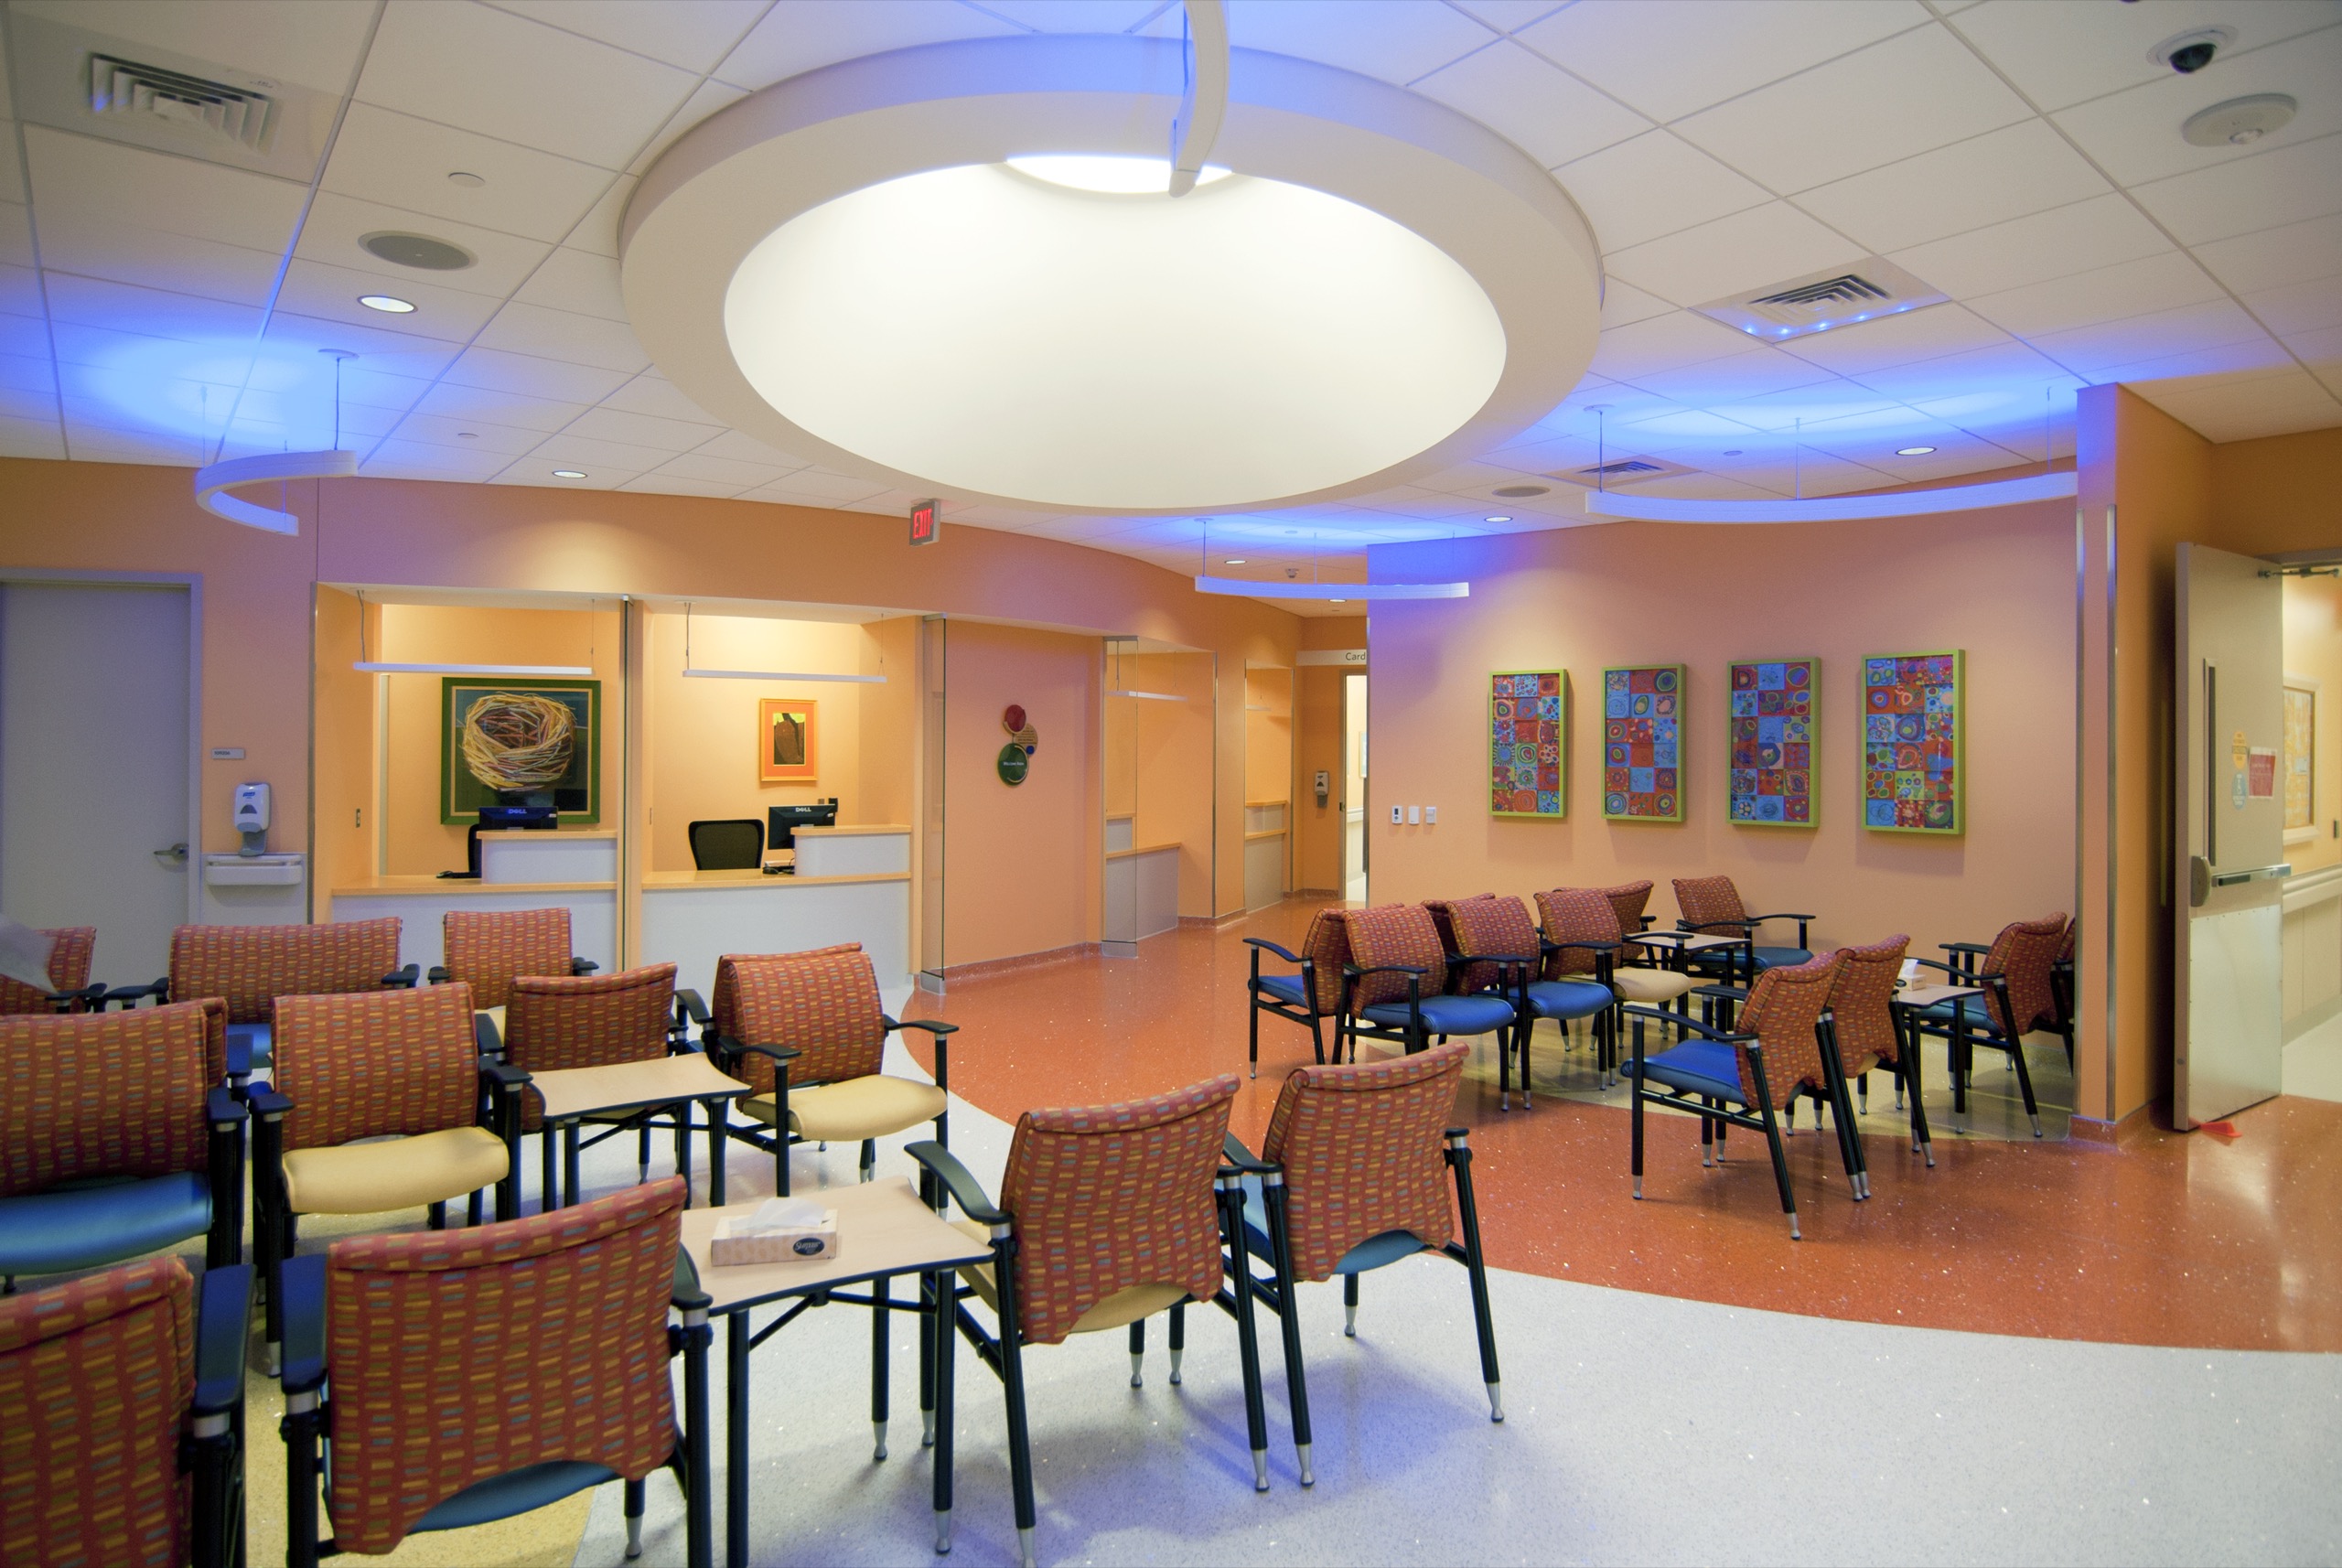 Hospital waiting area - acoustically engineered space